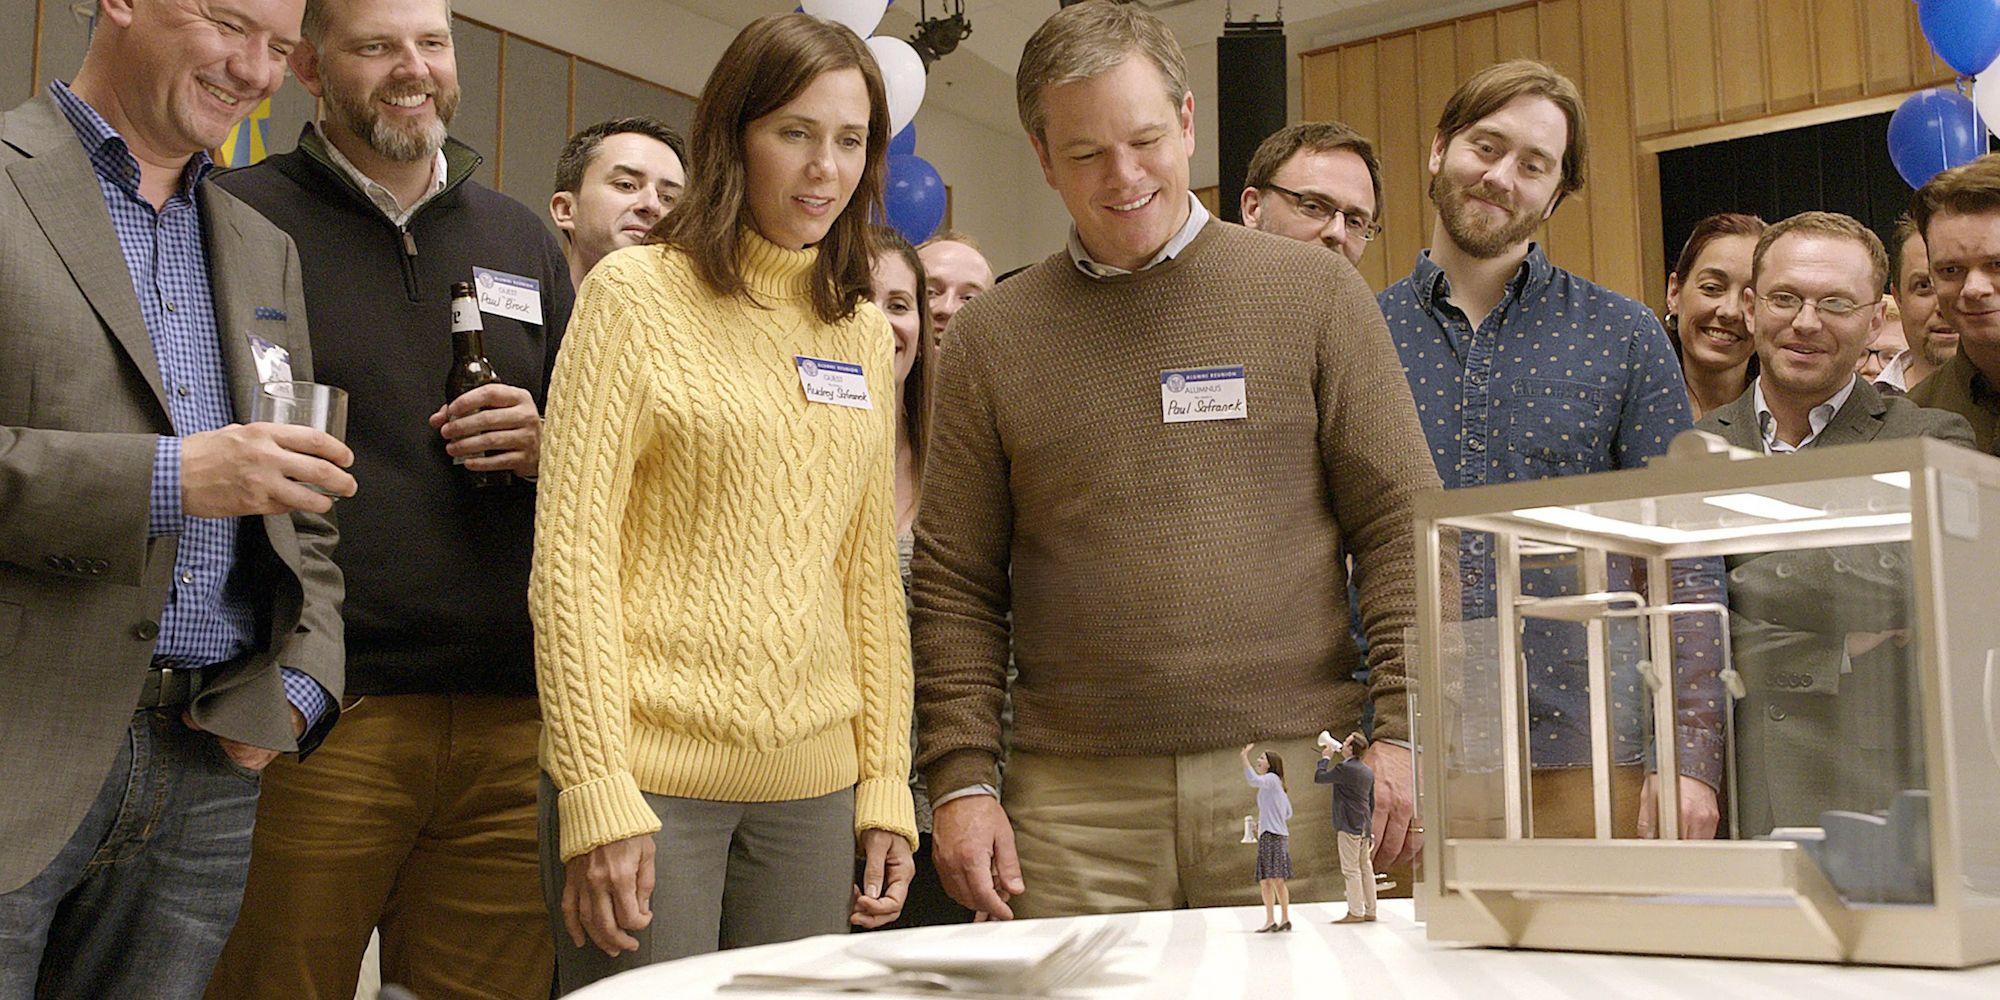 Kristen Wiig and Matt Damon as Audrey and Paul smiling while looking down at two miniature people waving Downsizing